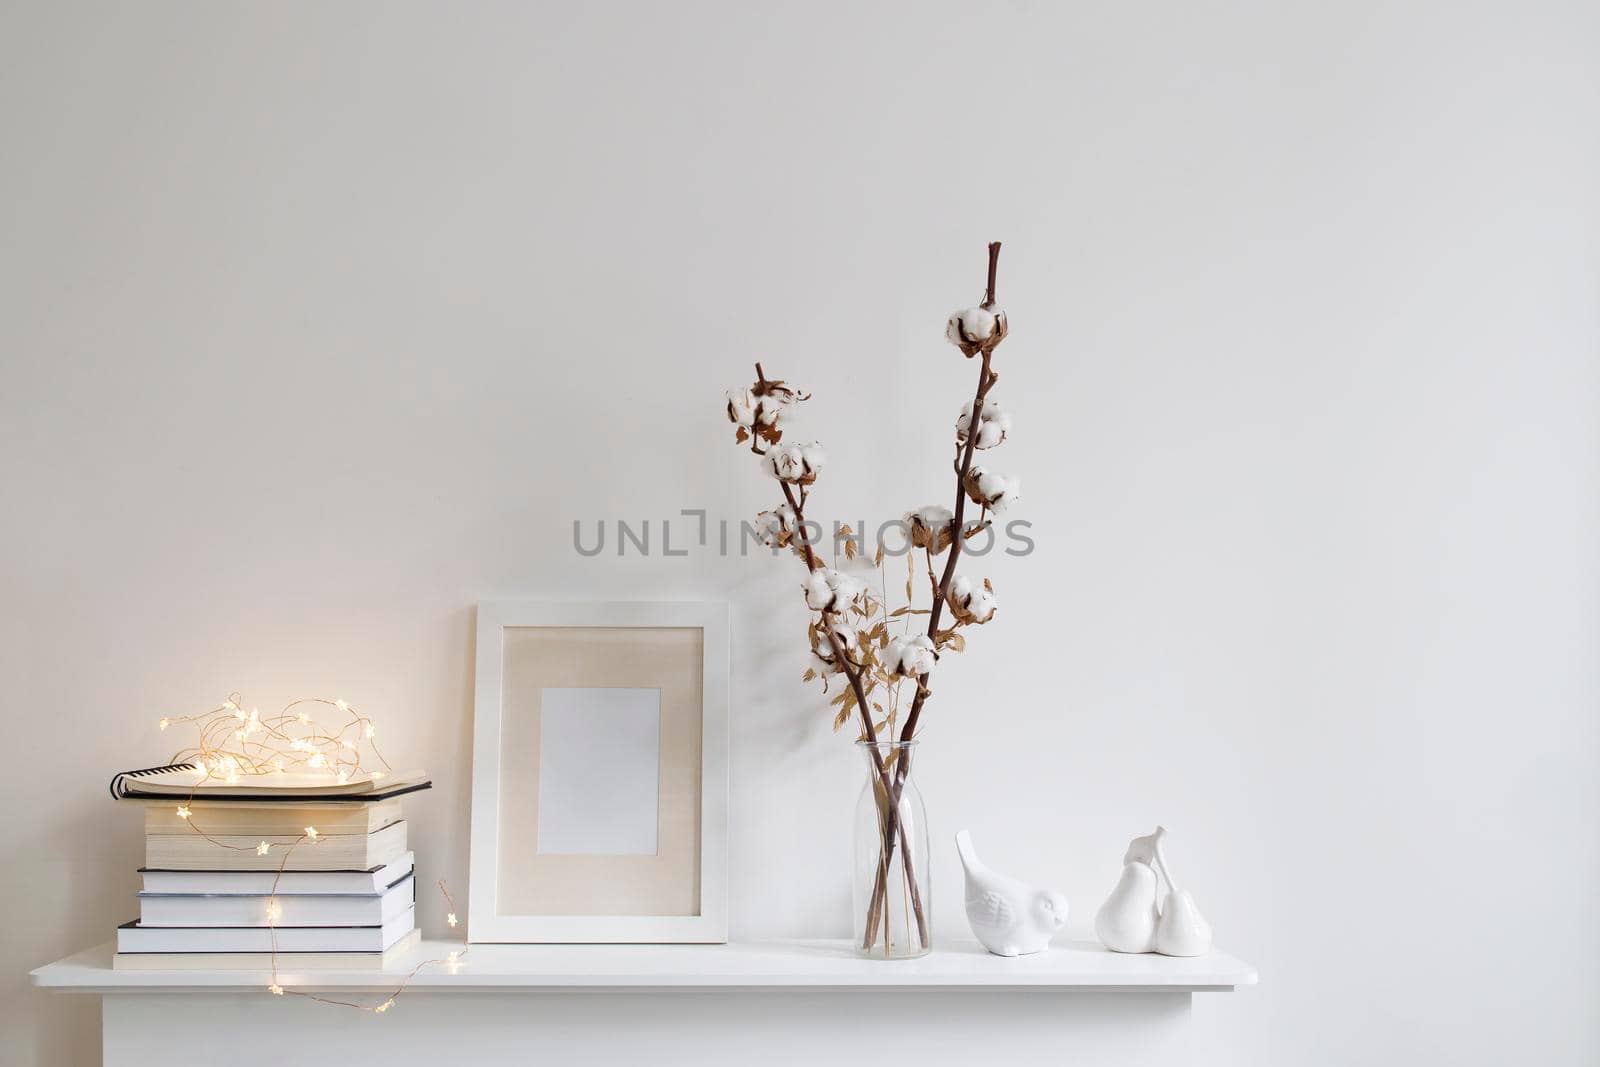 Scandinavian style room interior in white tones. A vase with cotton flowers, a stack of books, a photo frame, a bird figurine on a wooden surface of a shelf. Copy space. by elenarostunova